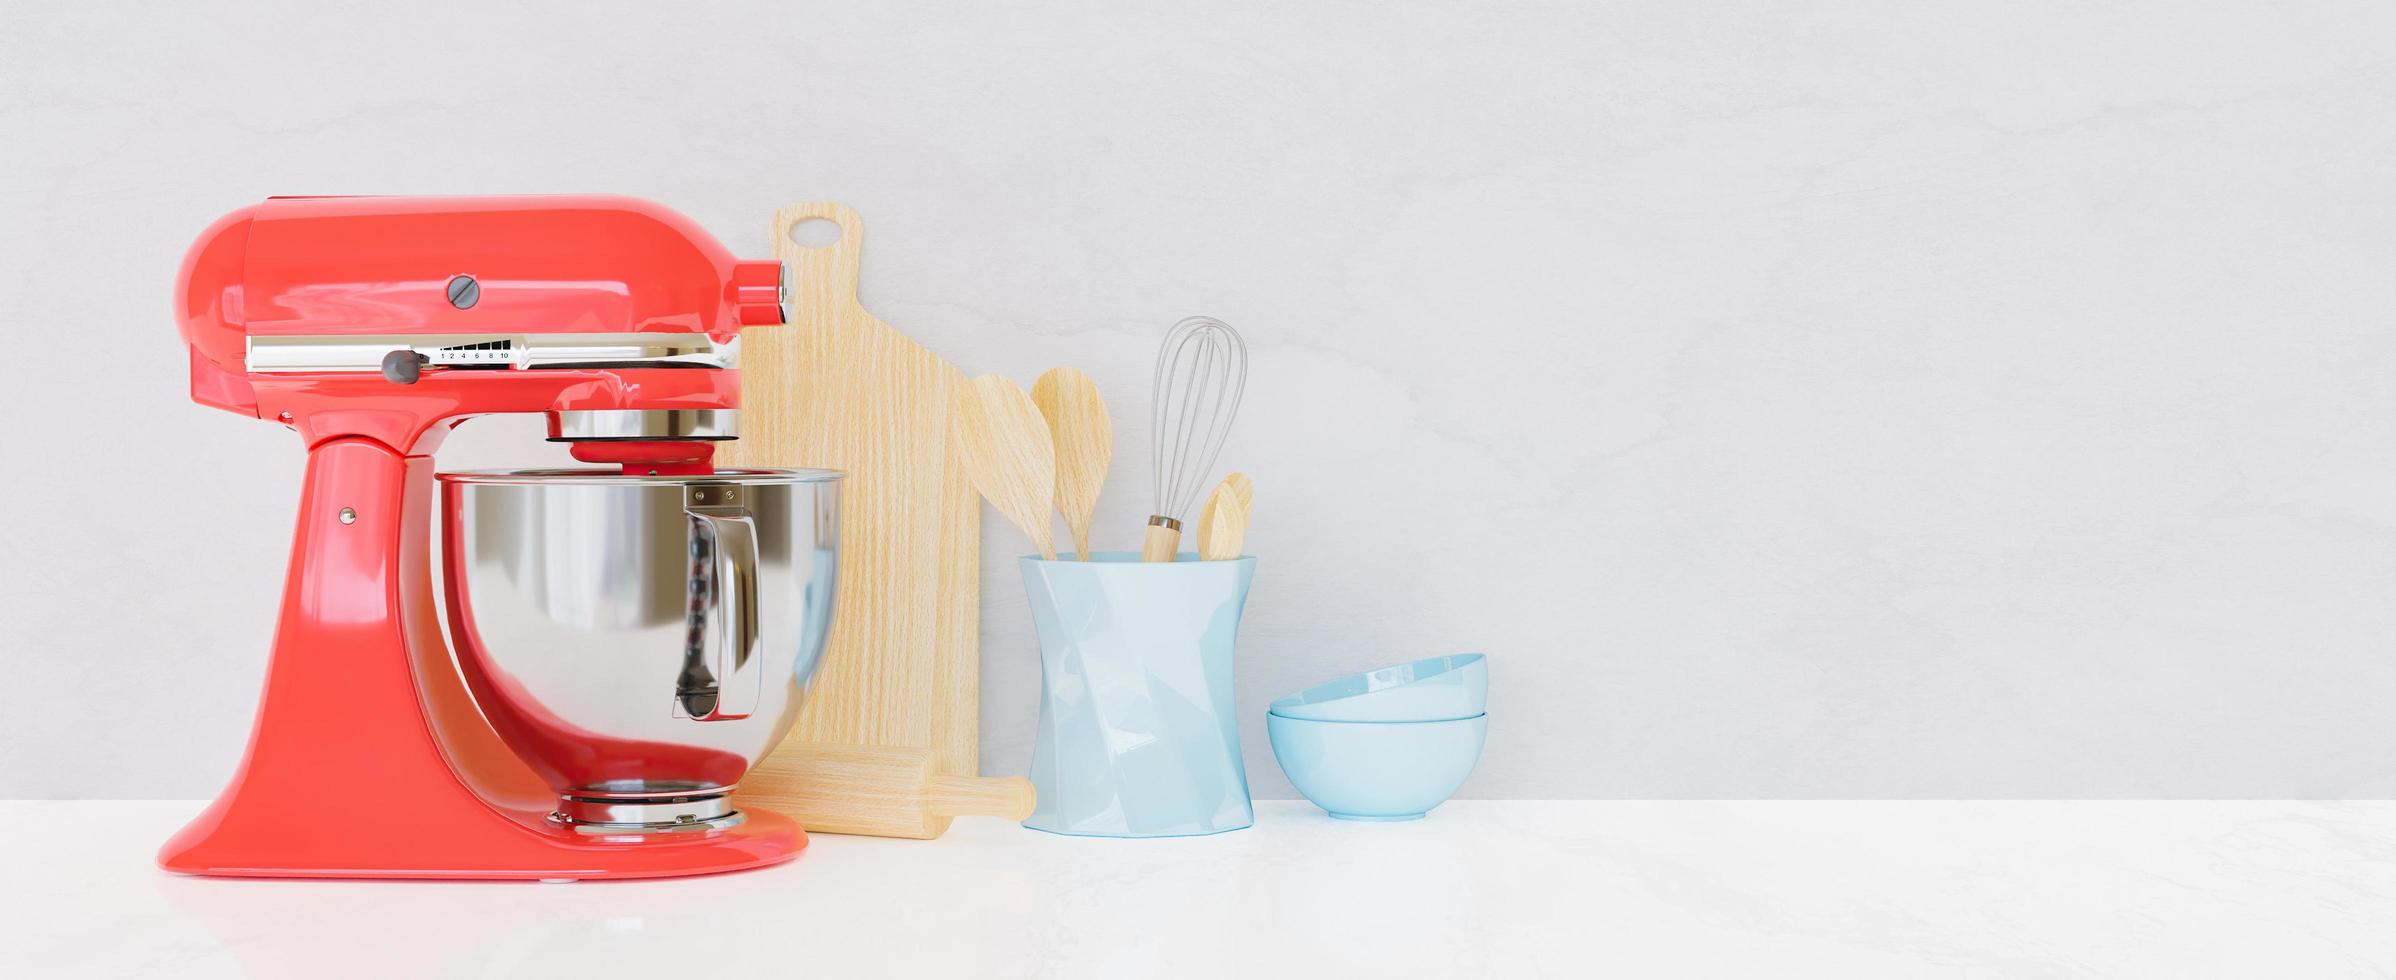 Kitchen utensils with white wall and table and a red kitchen mixer in front, 3d rendering photo